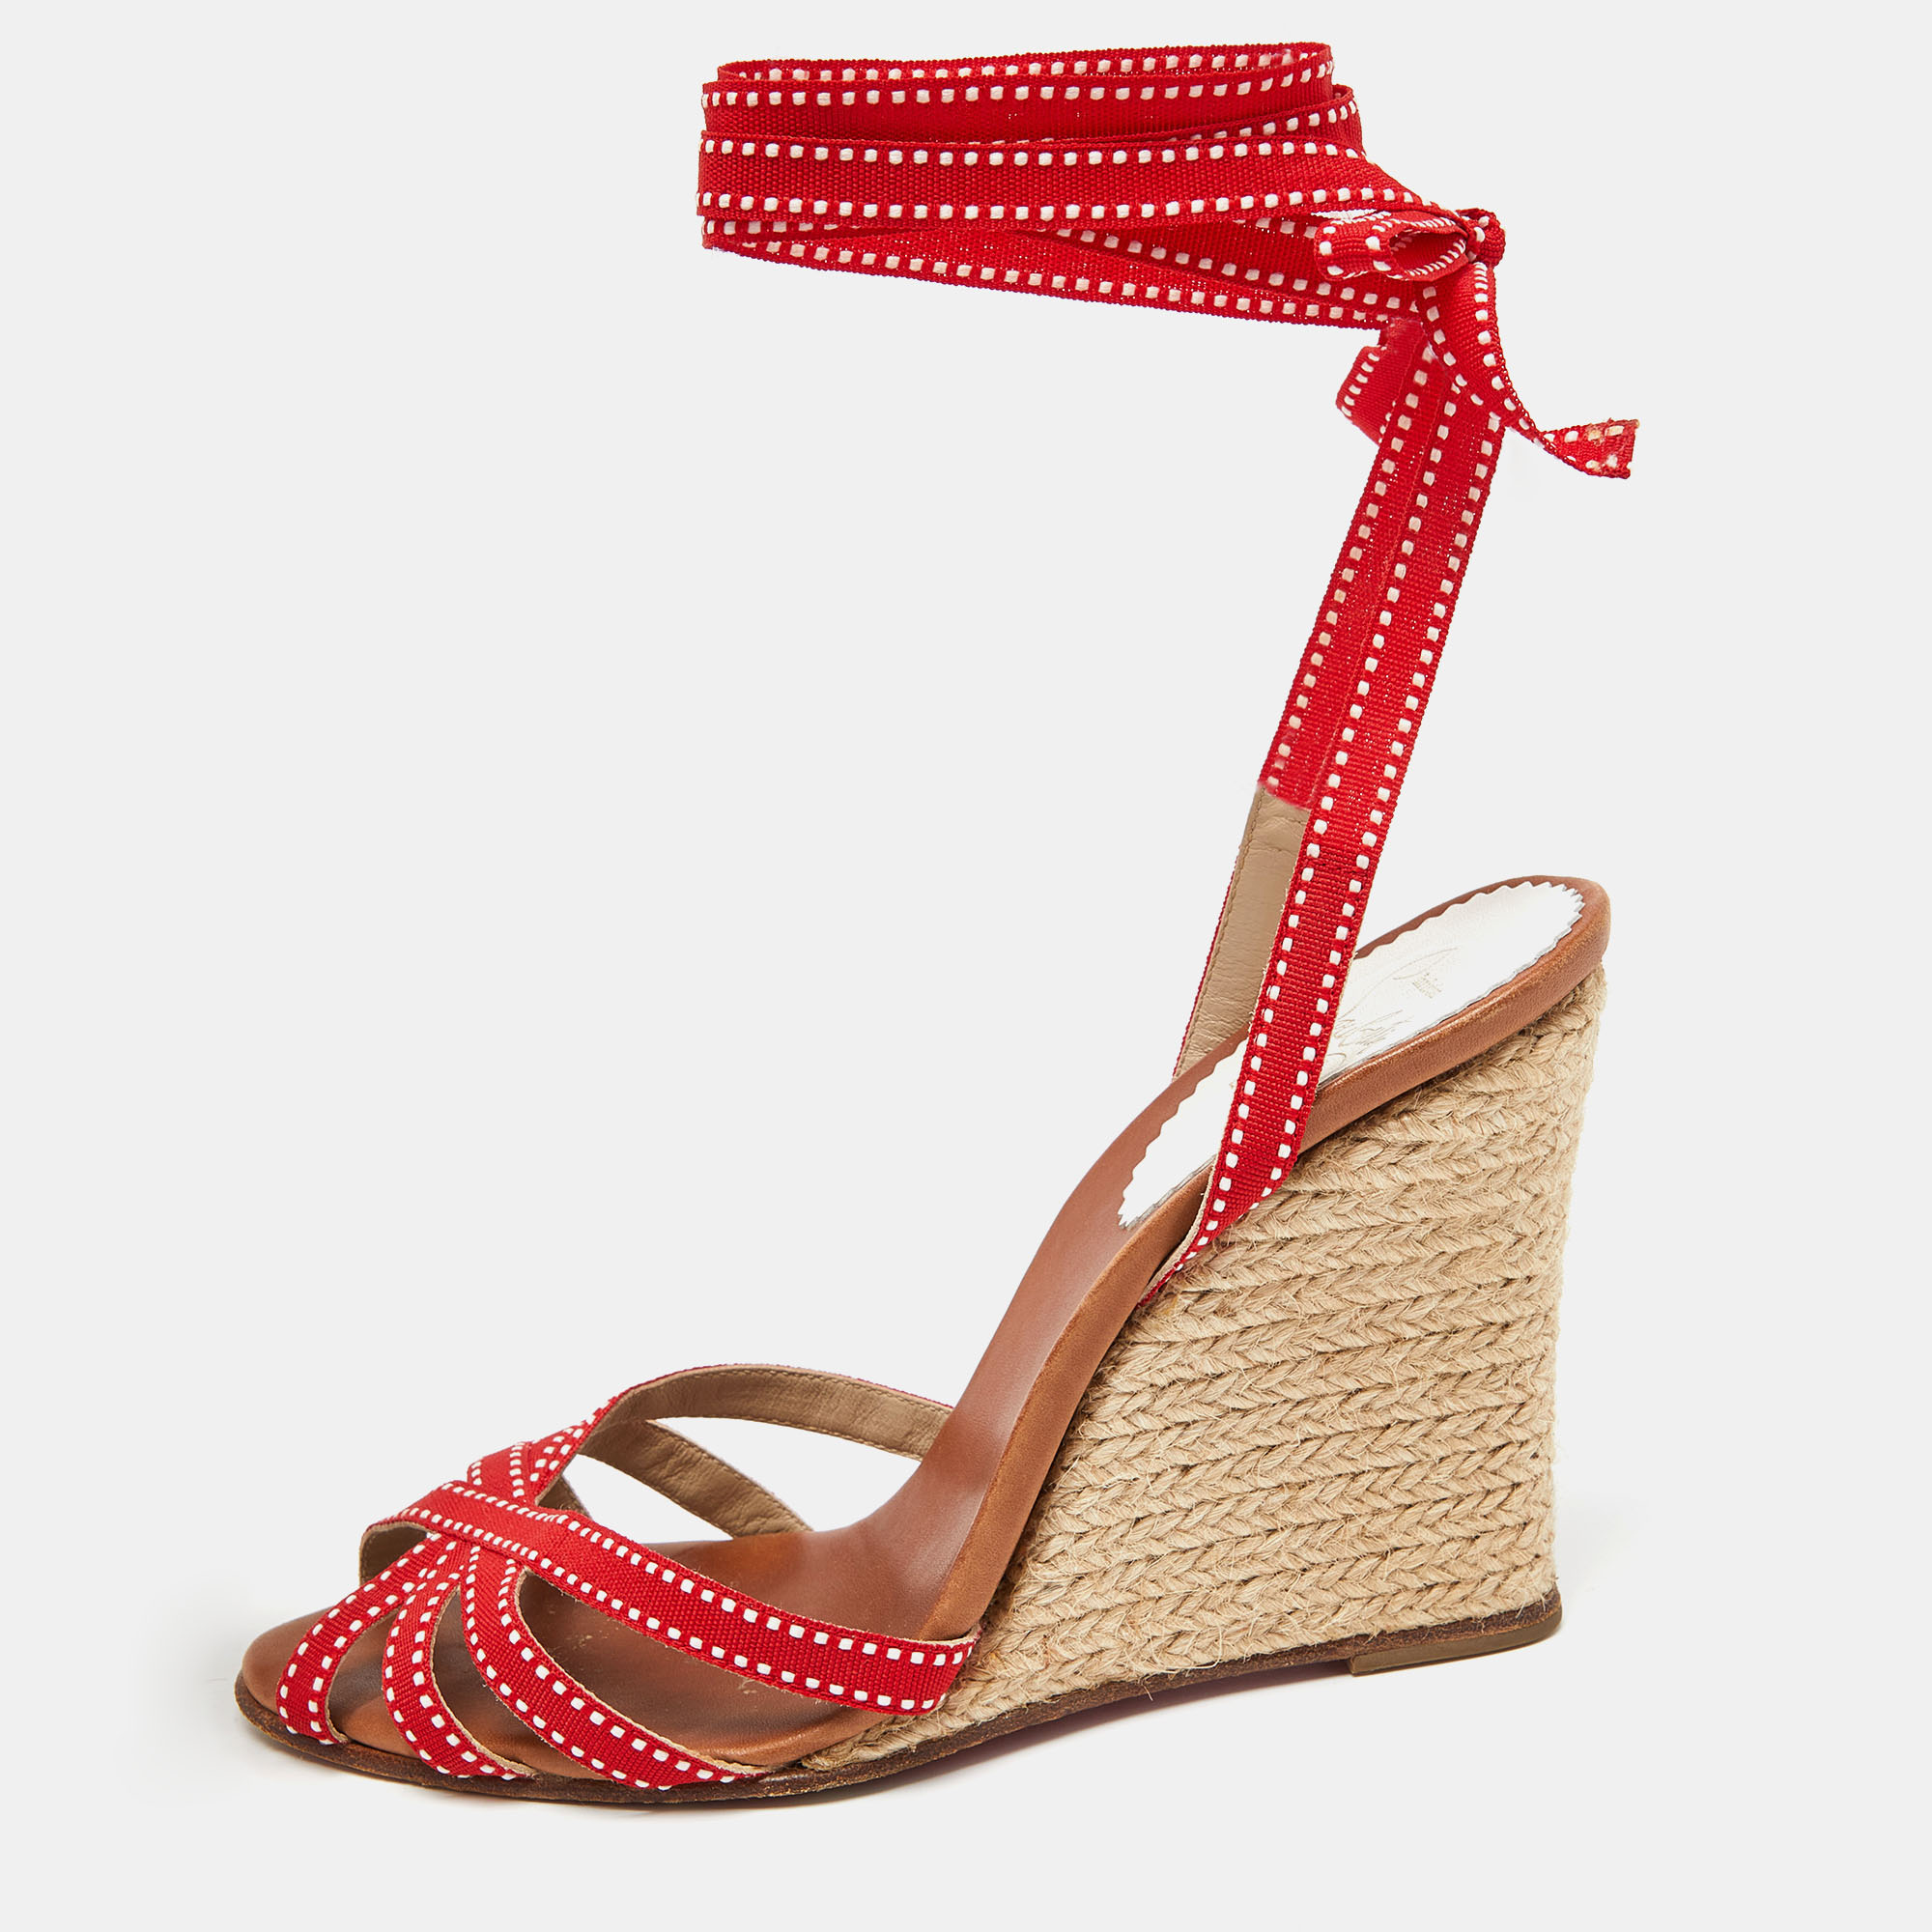 Christian louboutin red fabric wedge espadrille ankle wrap sandals size 37